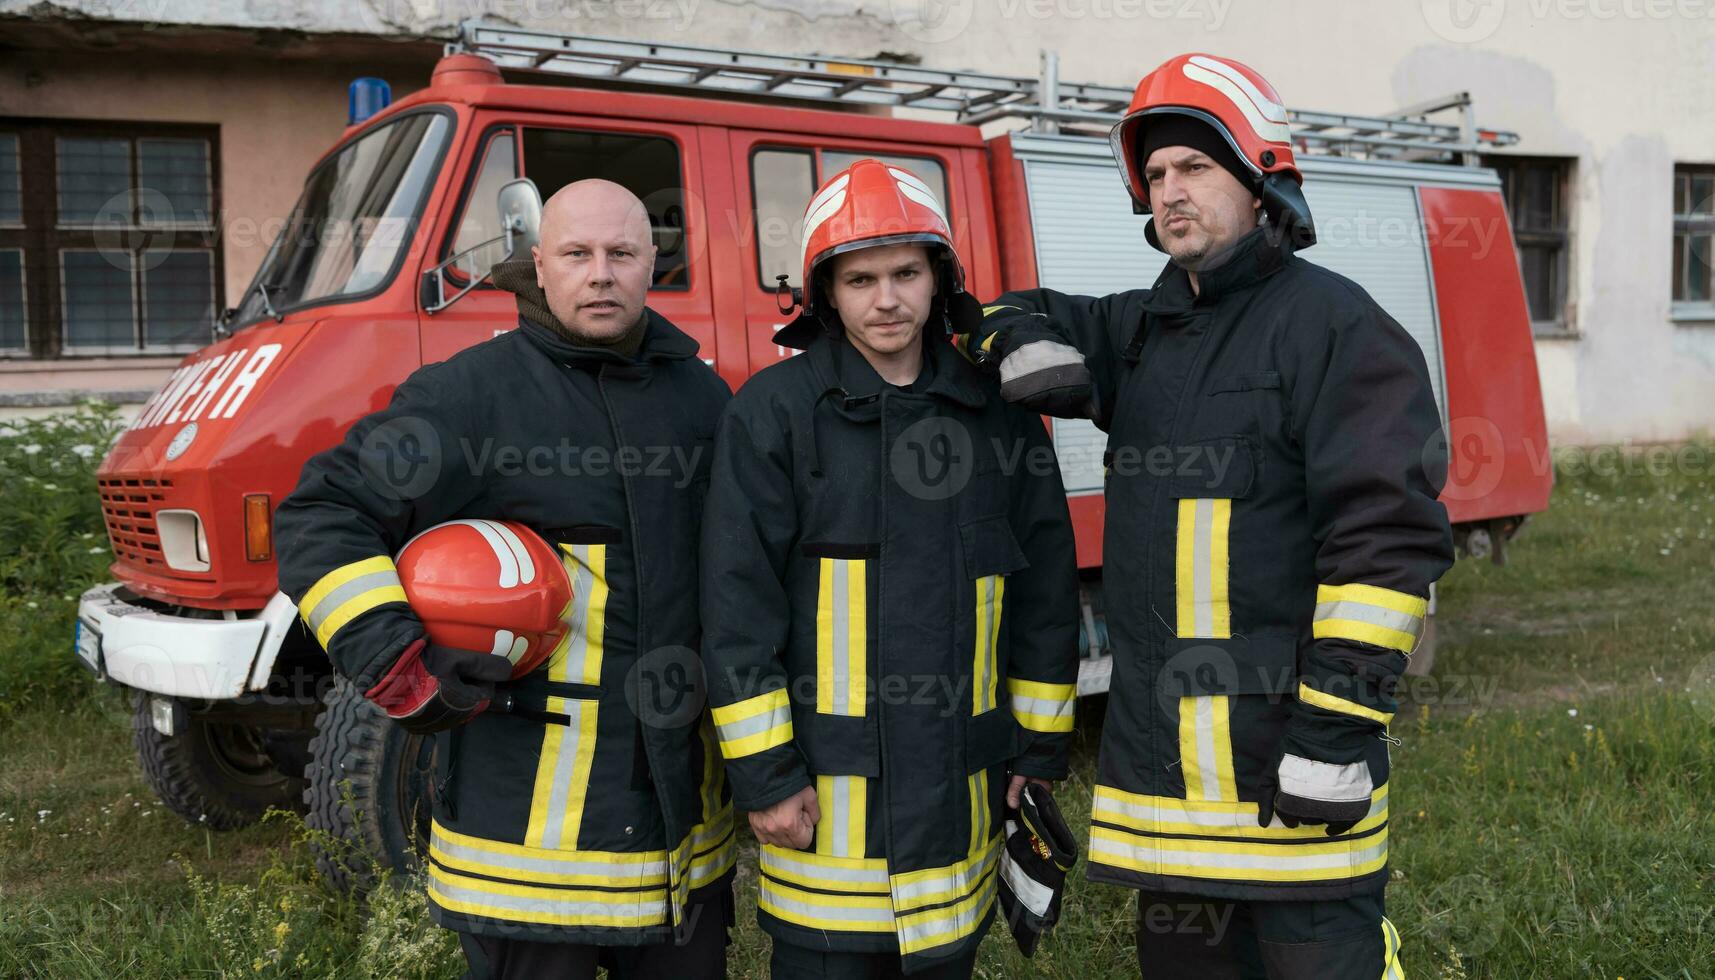 Group of fire fighters standing confident after a well done rescue operation. Firemen ready for emergency service. photo